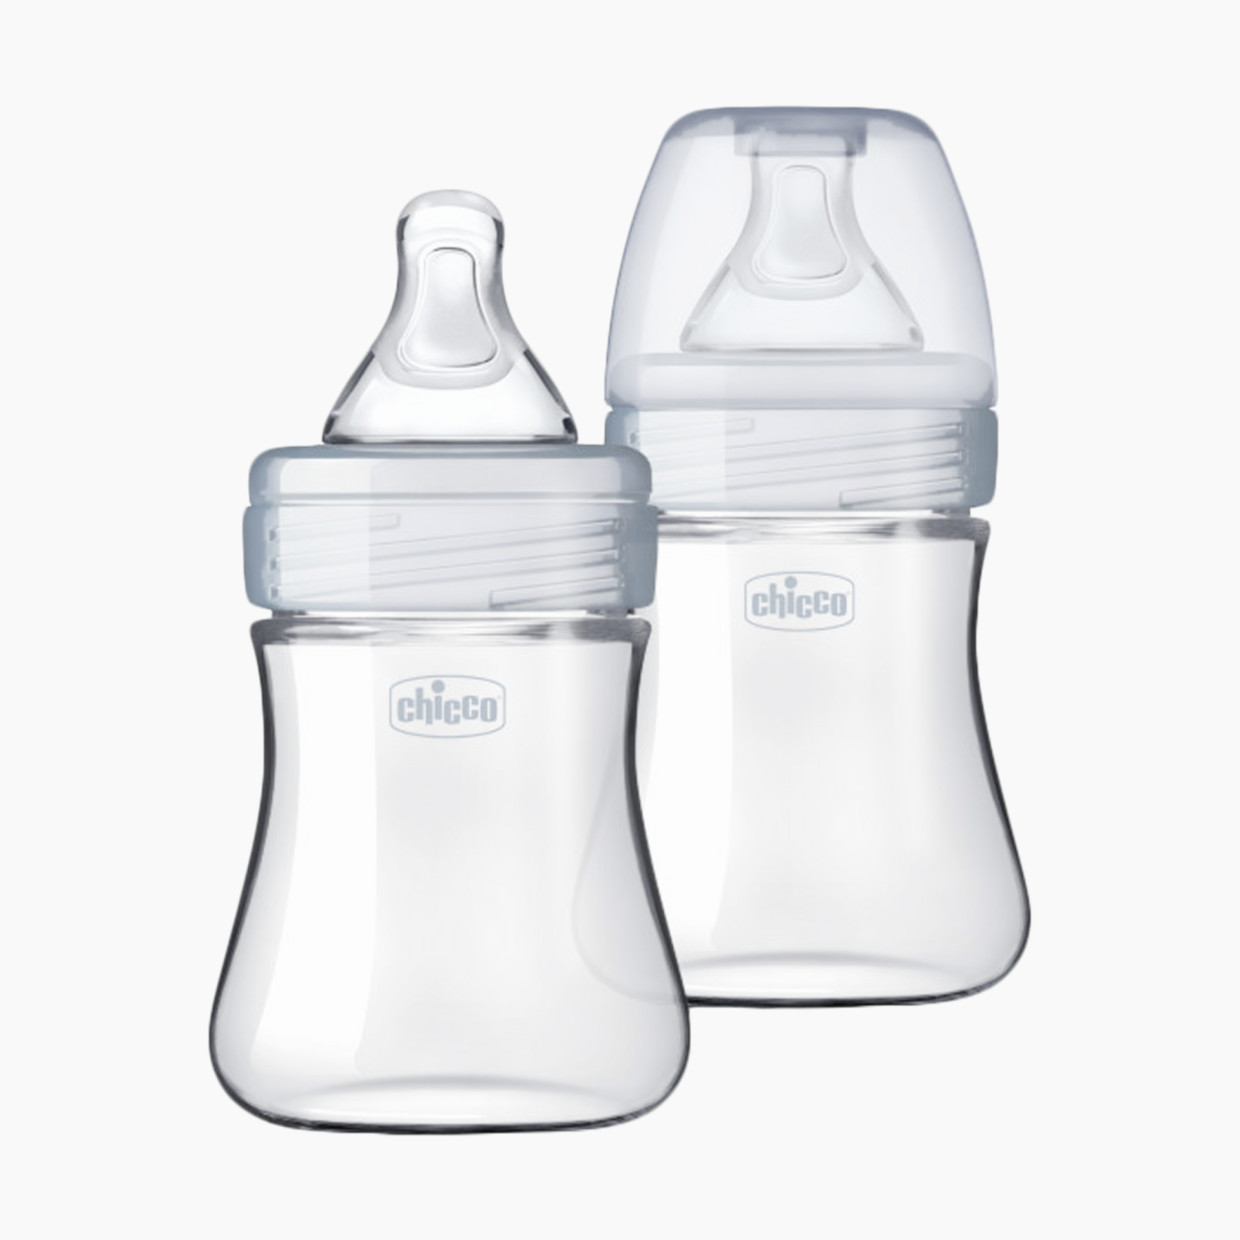 Chicco Duo Hybrid Baby Bottles with Invinci-Glass (2 Pack) - Neutral, 5 oz